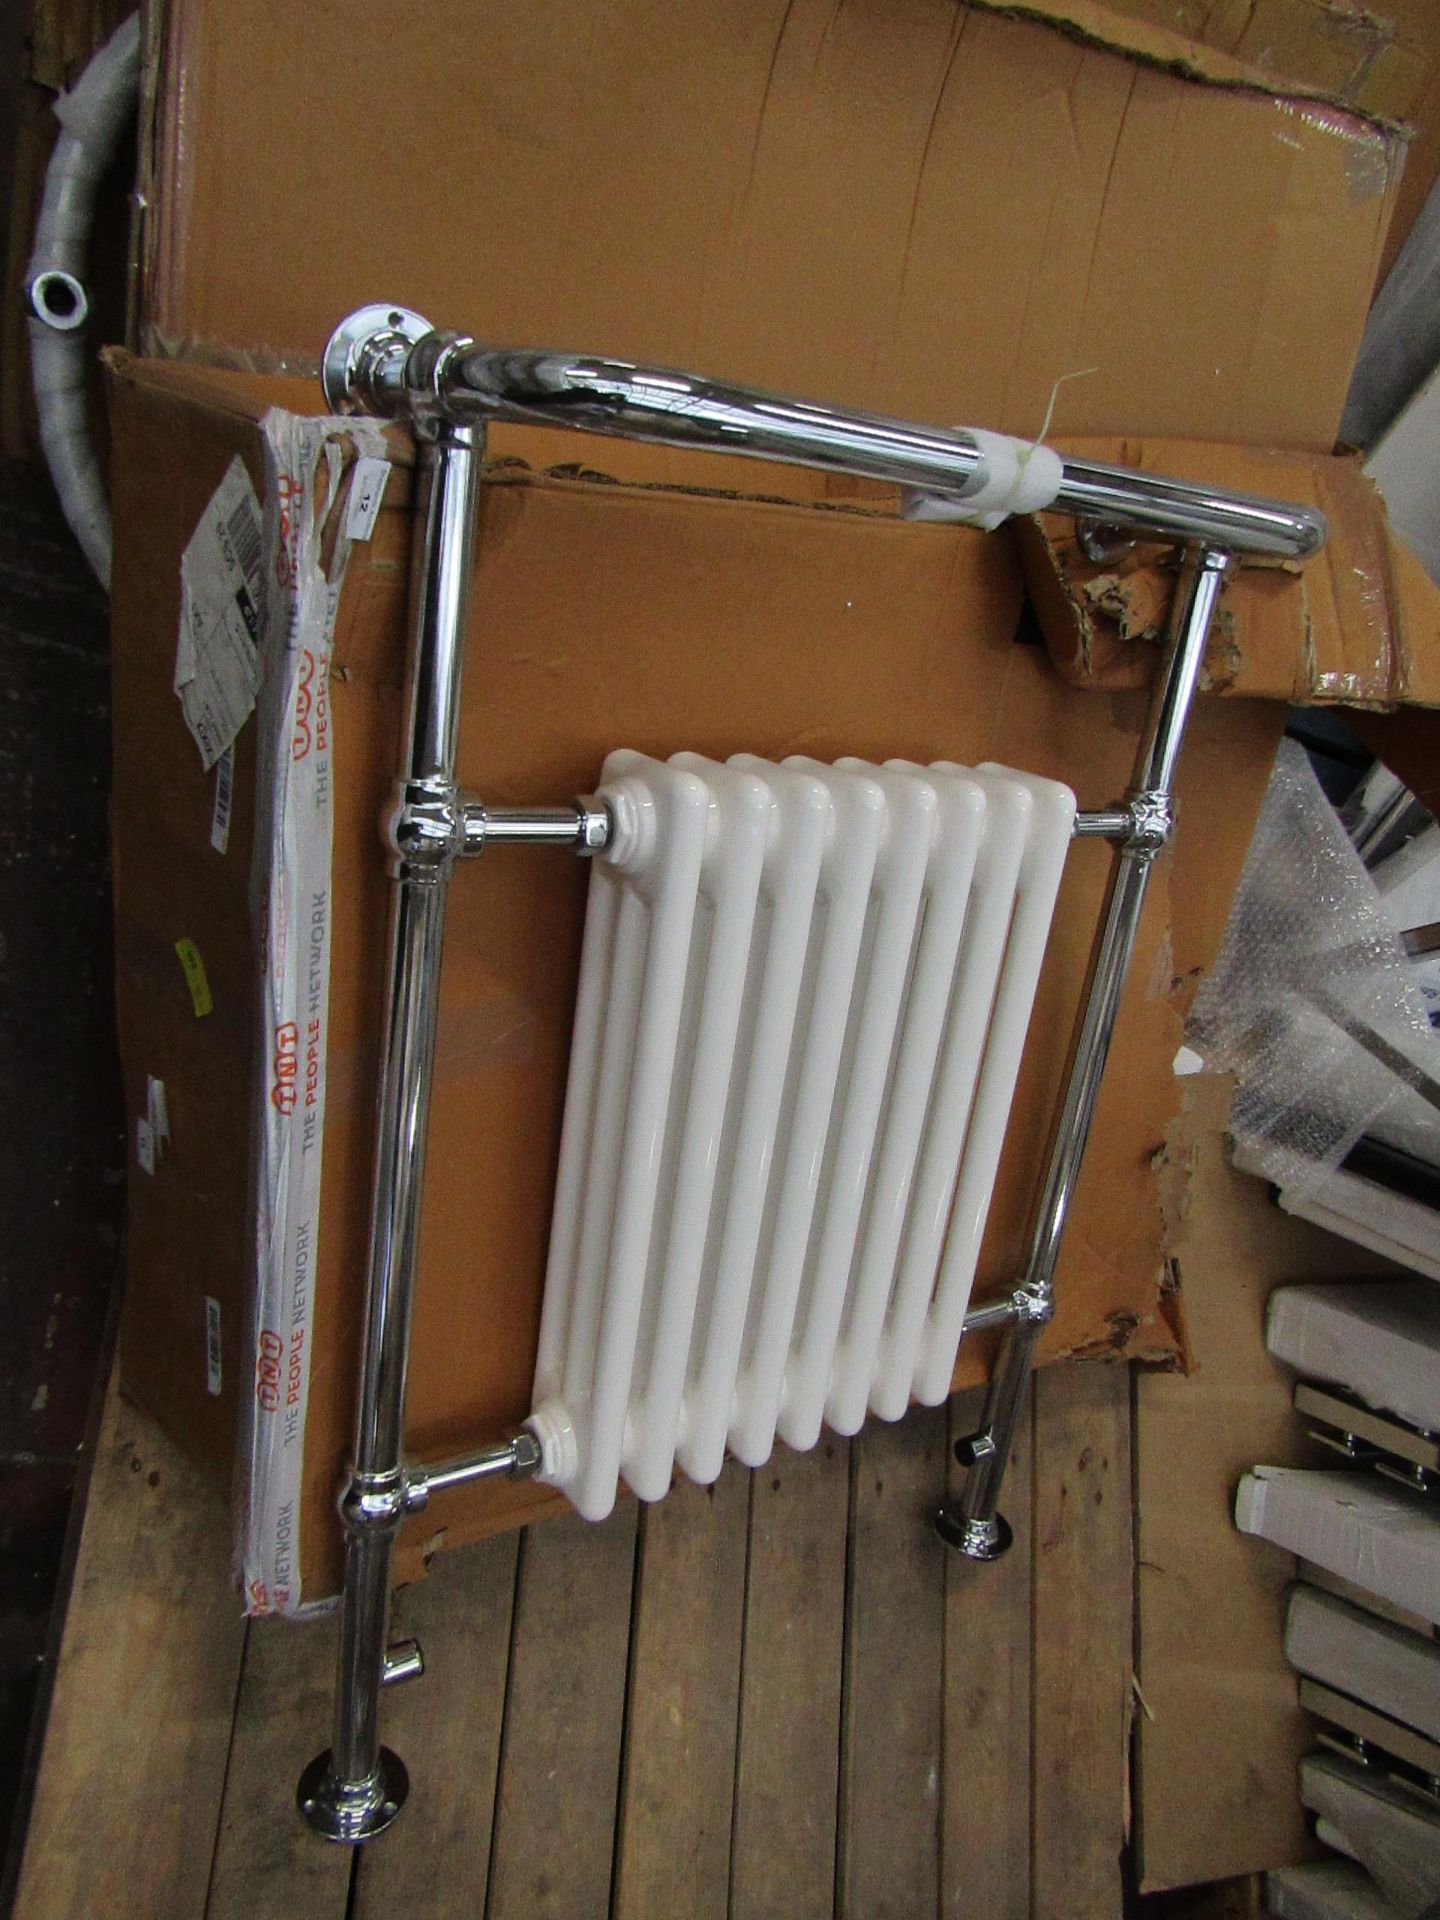 Clematis towel radiator, item is unchecked and may contain marks, cosmetic damage and more.